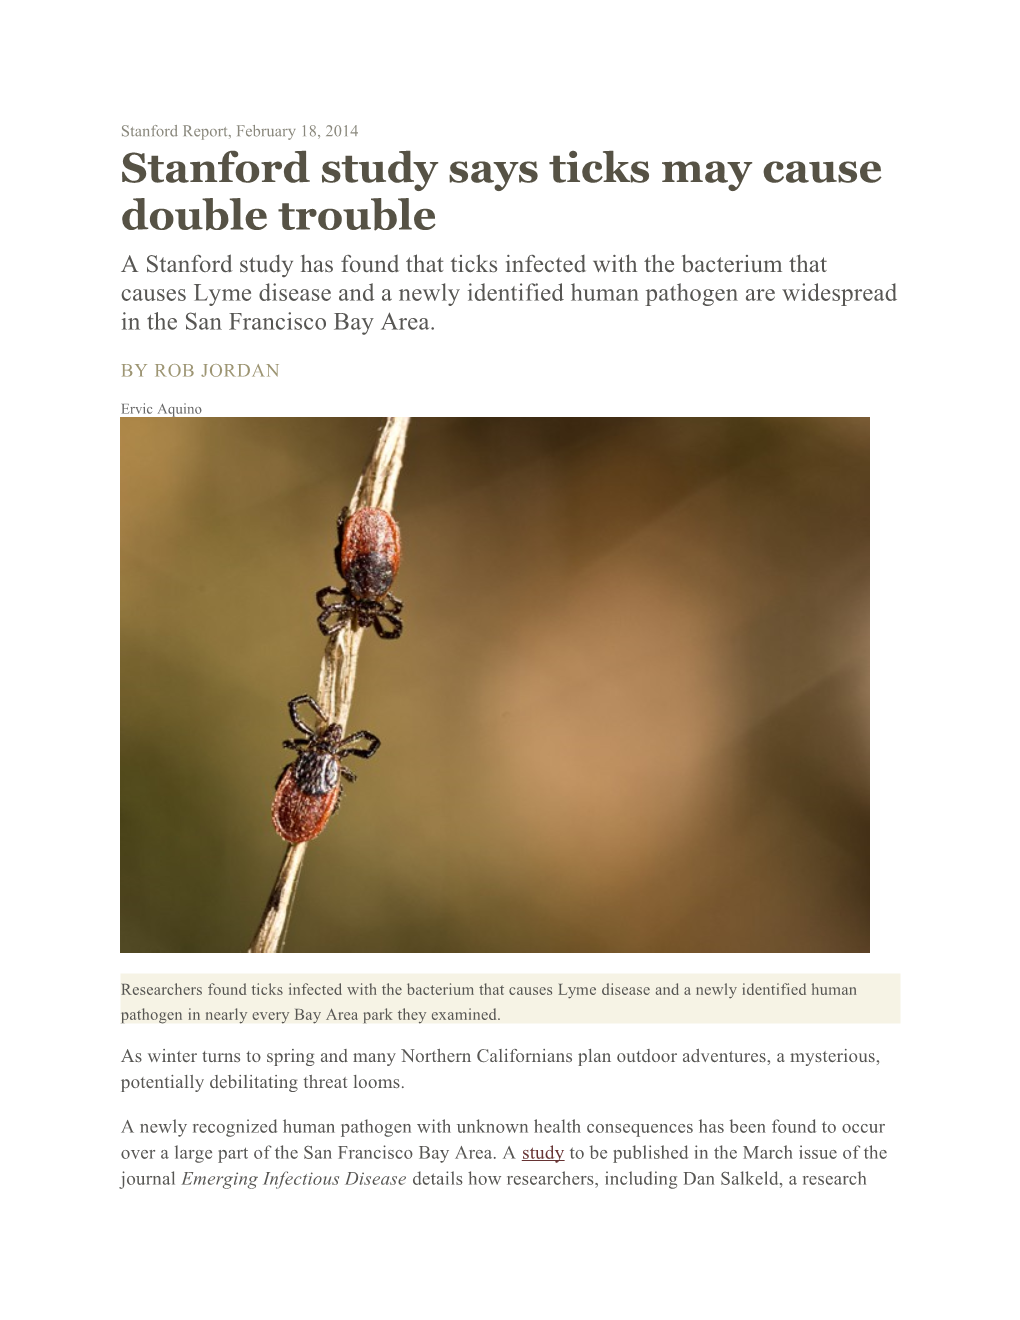 Stanford Study Says Ticks May Cause Double Trouble